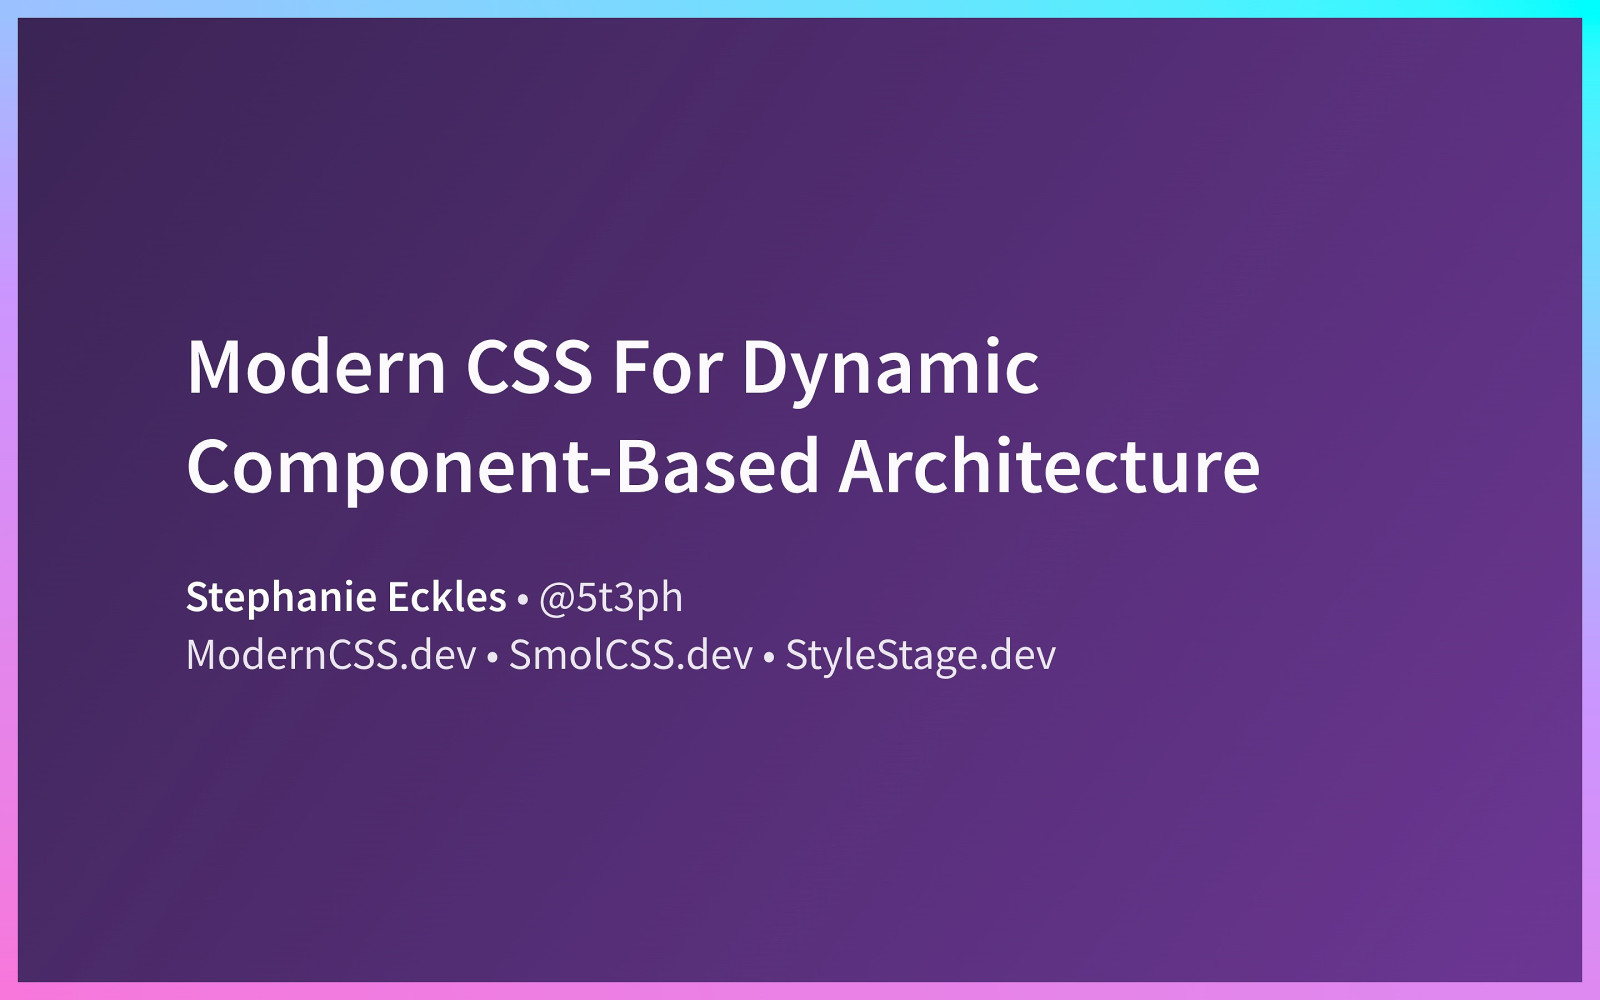 Modern CSS For Dynamic Component-Based Architecture by Stephanie Eckles